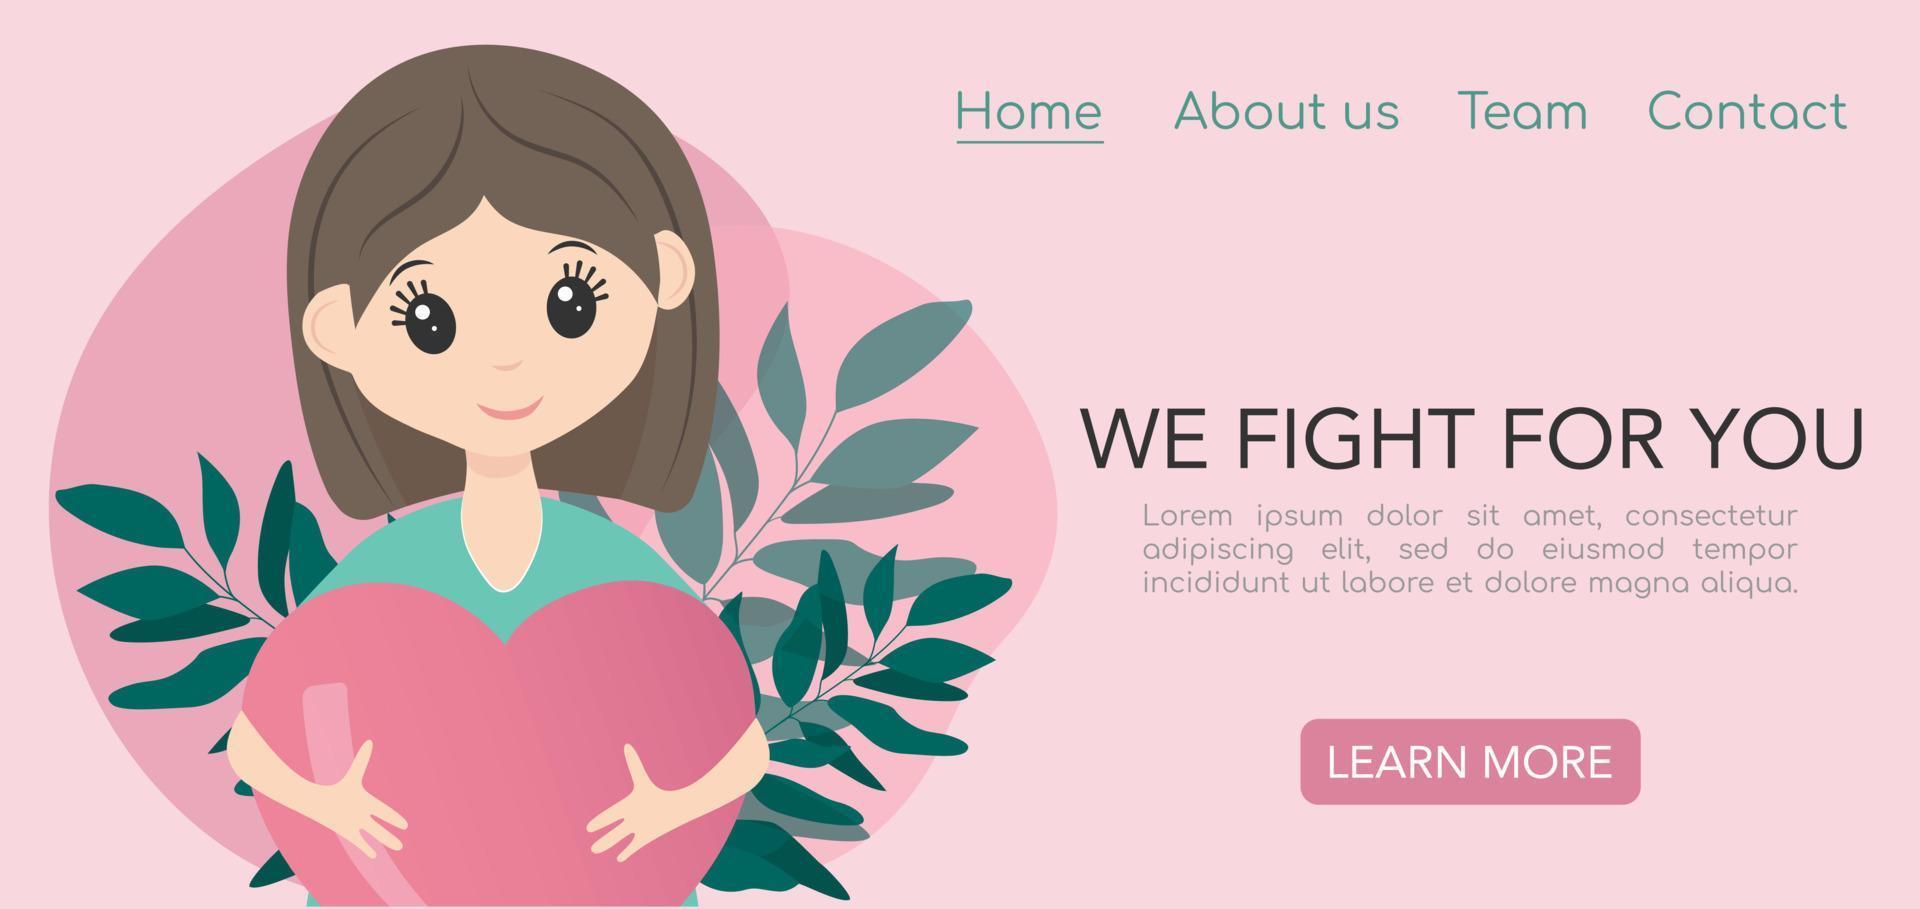 Doctors save our lives fight for us template. Web page with  happy female nurse or doctor in uniform. Pink and mint colors. Vector illustration for website, poster, banner.